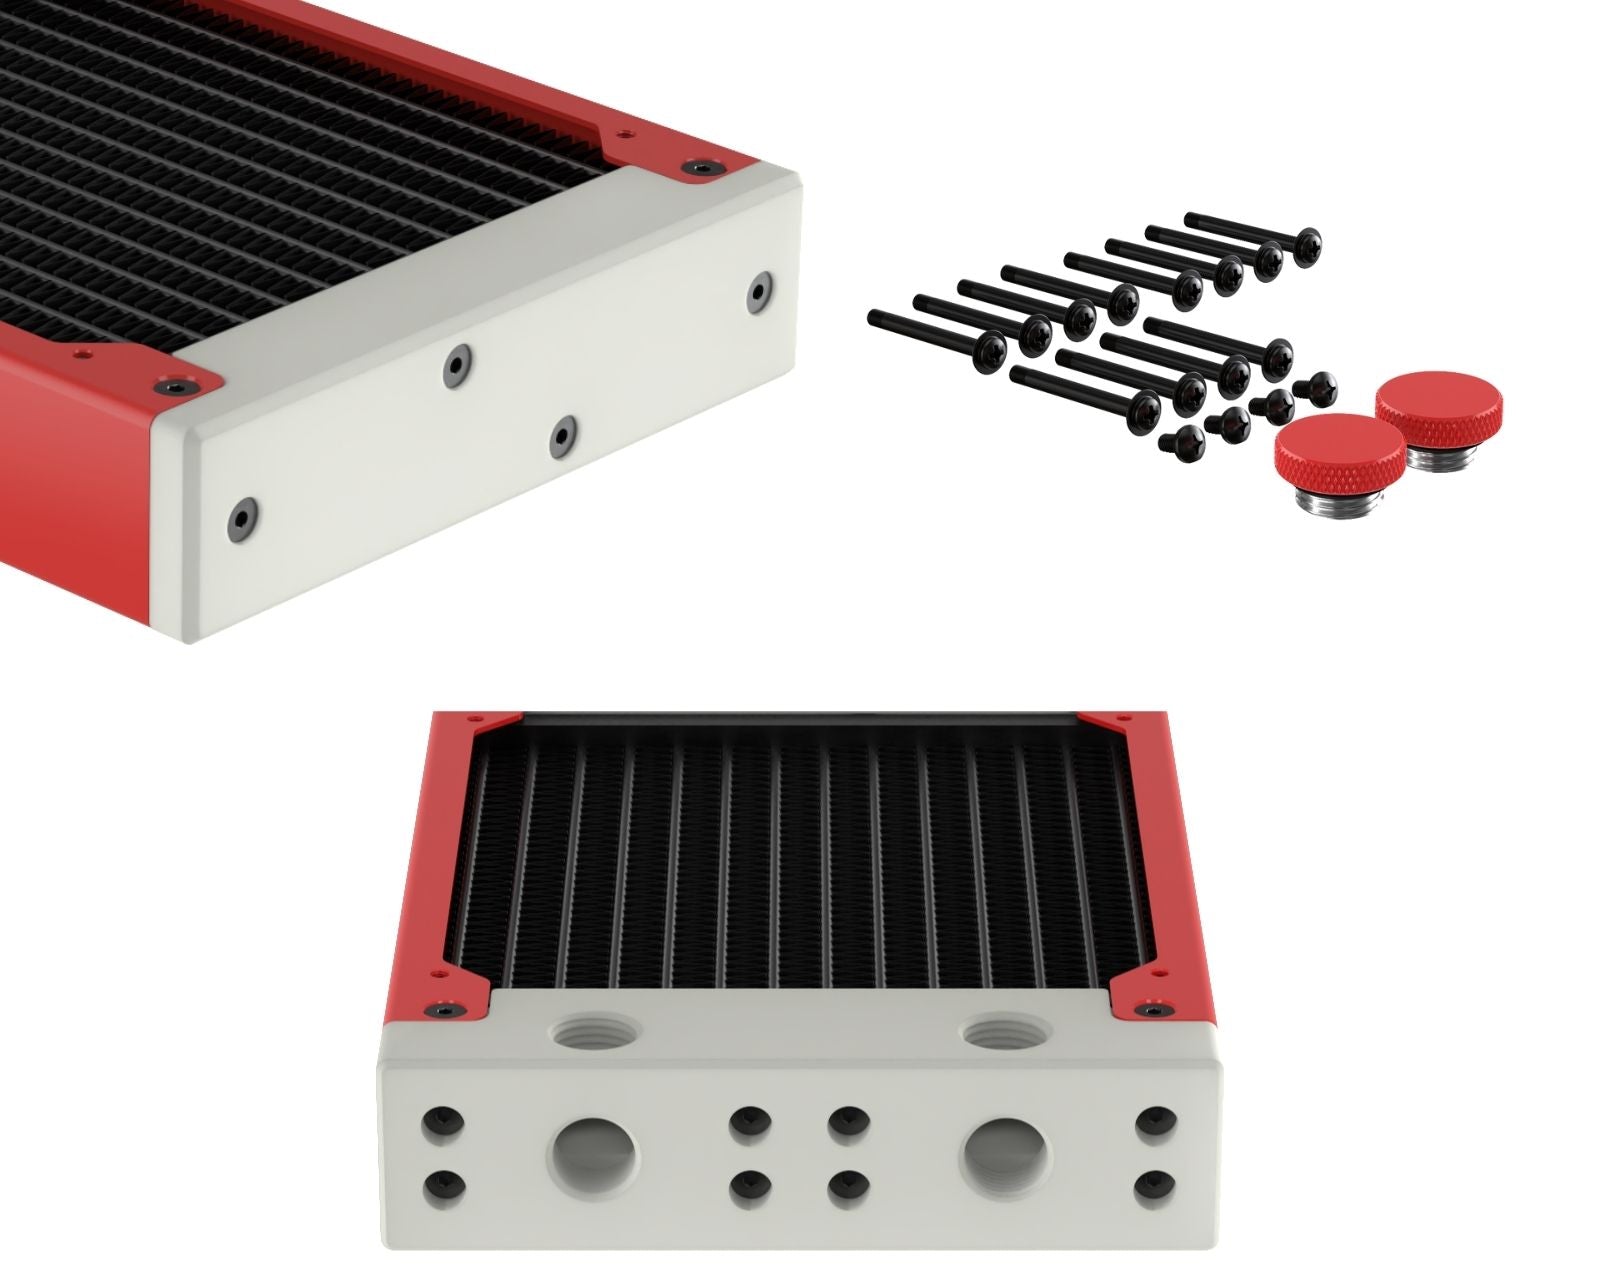 PrimoChill 360SL (30mm) EXIMO Modular Radiator, White POM, 3x120mm, Triple Fan (R-SL-W36) Available in 20+ Colors, Assembled in USA and Custom Watercooling Loop Ready - Razor Red